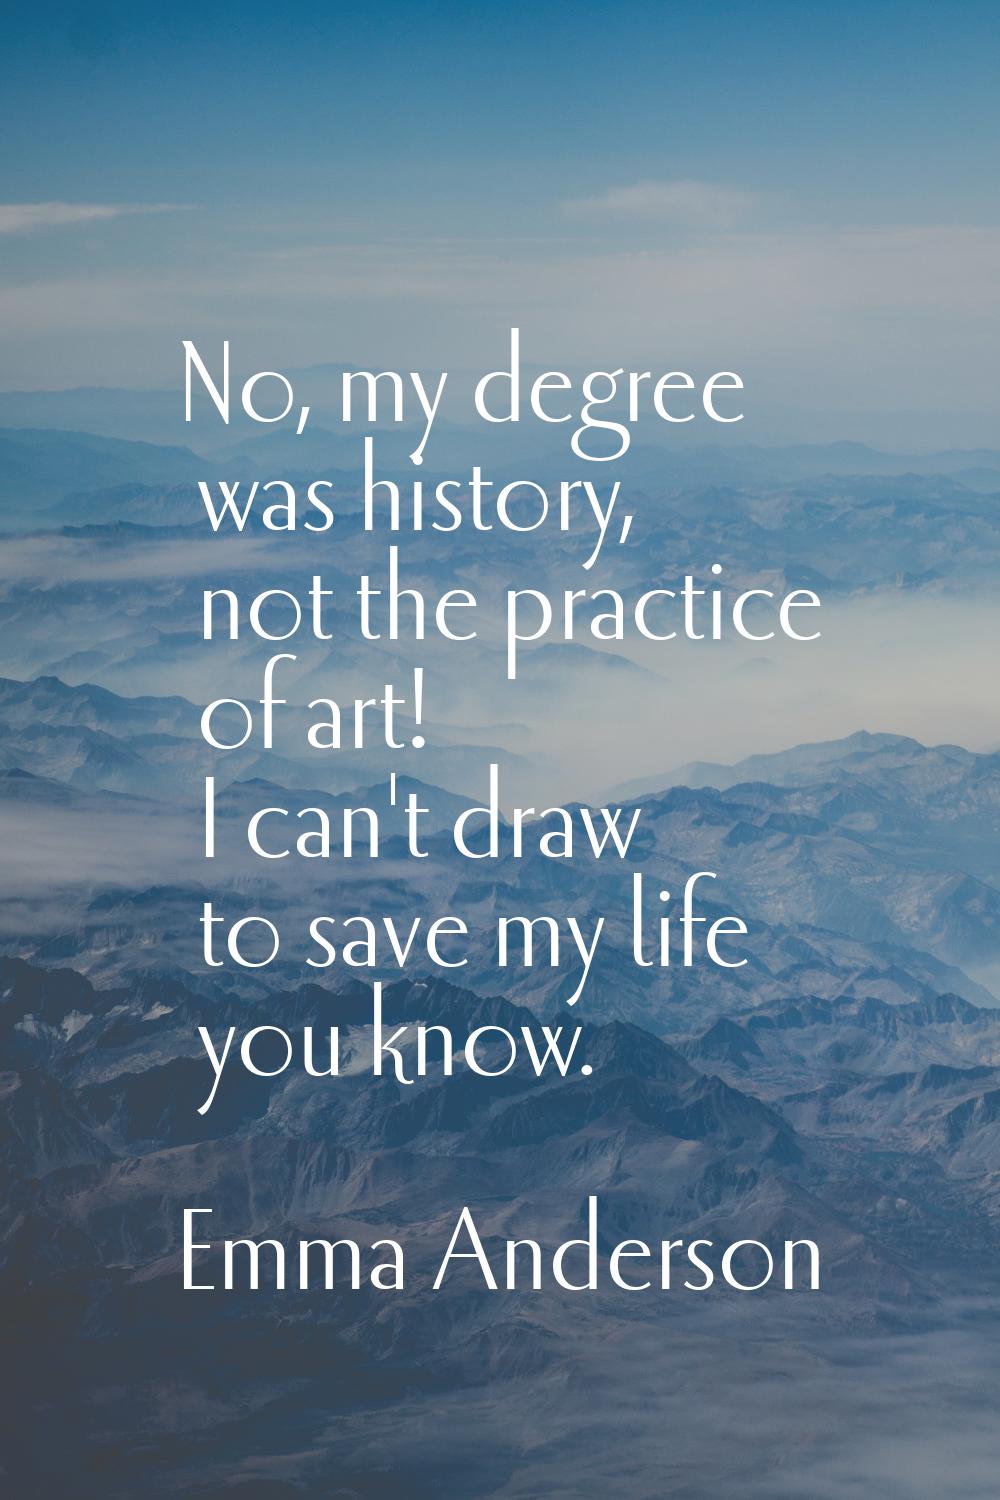 No, my degree was history, not the practice of art! I can't draw to save my life you know.